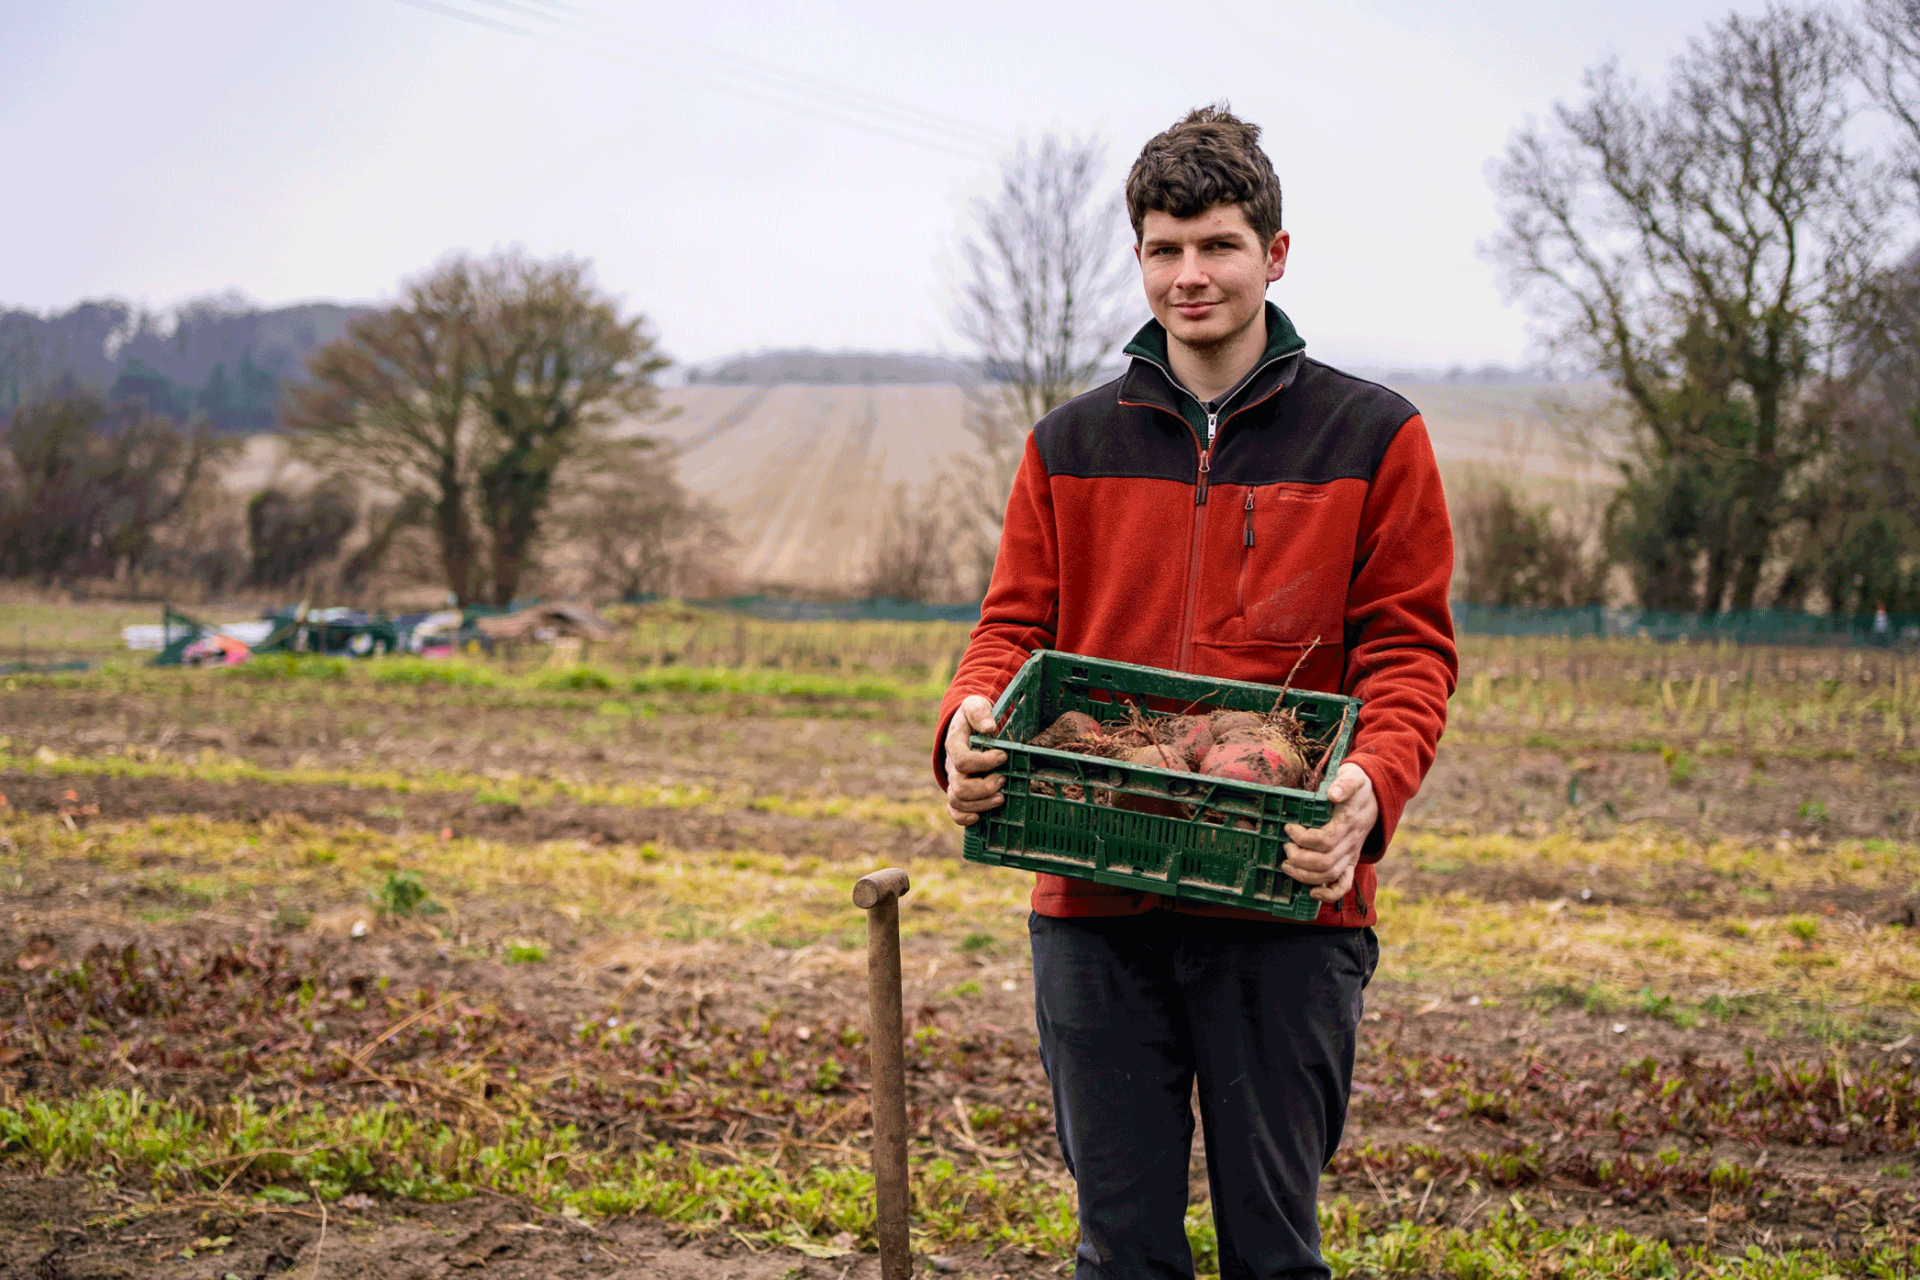 Student Jack on his farm holding basket of vegetables he has grown.